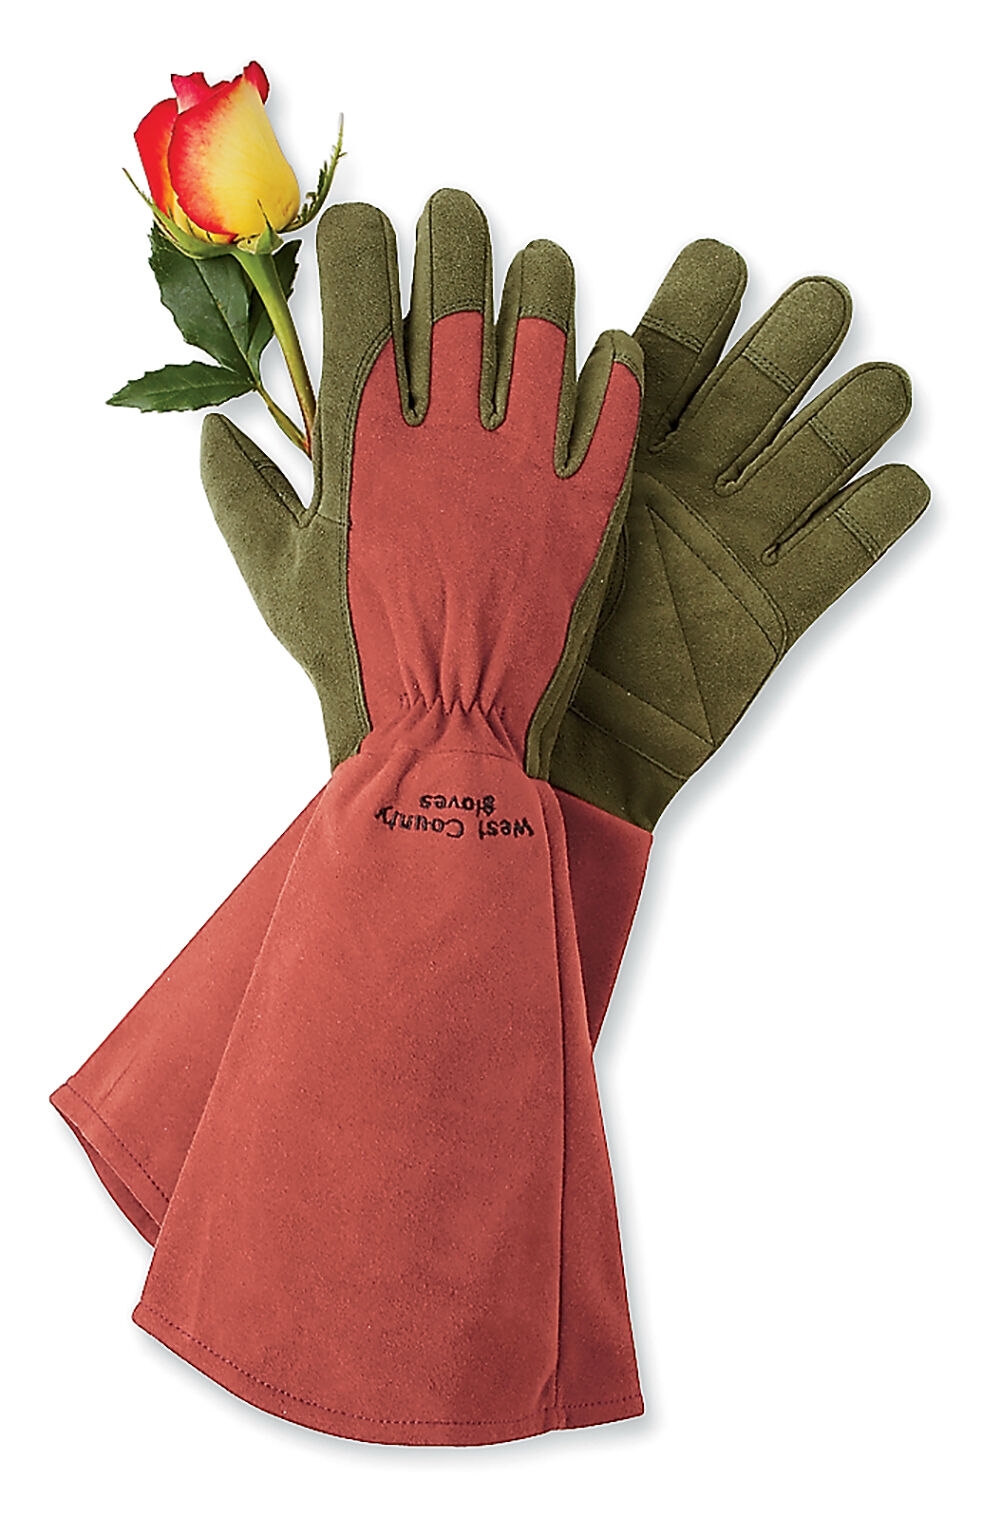 Rose Pruning Gloves for Men and Women Thorn Proof Goatskin Leather Gardening Gl 